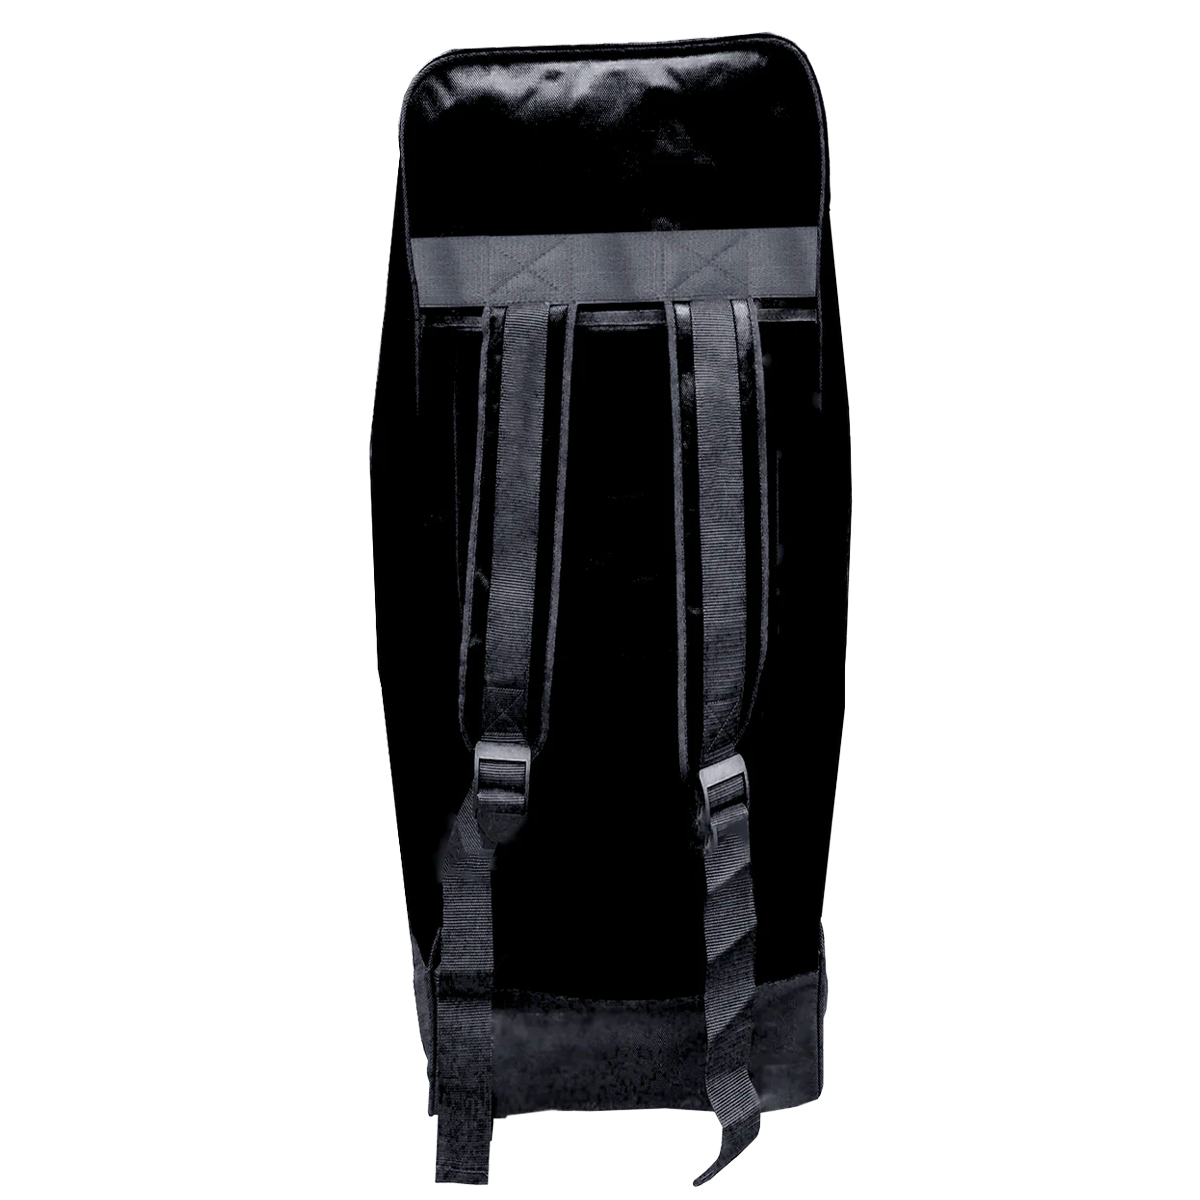 RIBER-Deluxe_Carry-Bag_Back_Excel Leisure